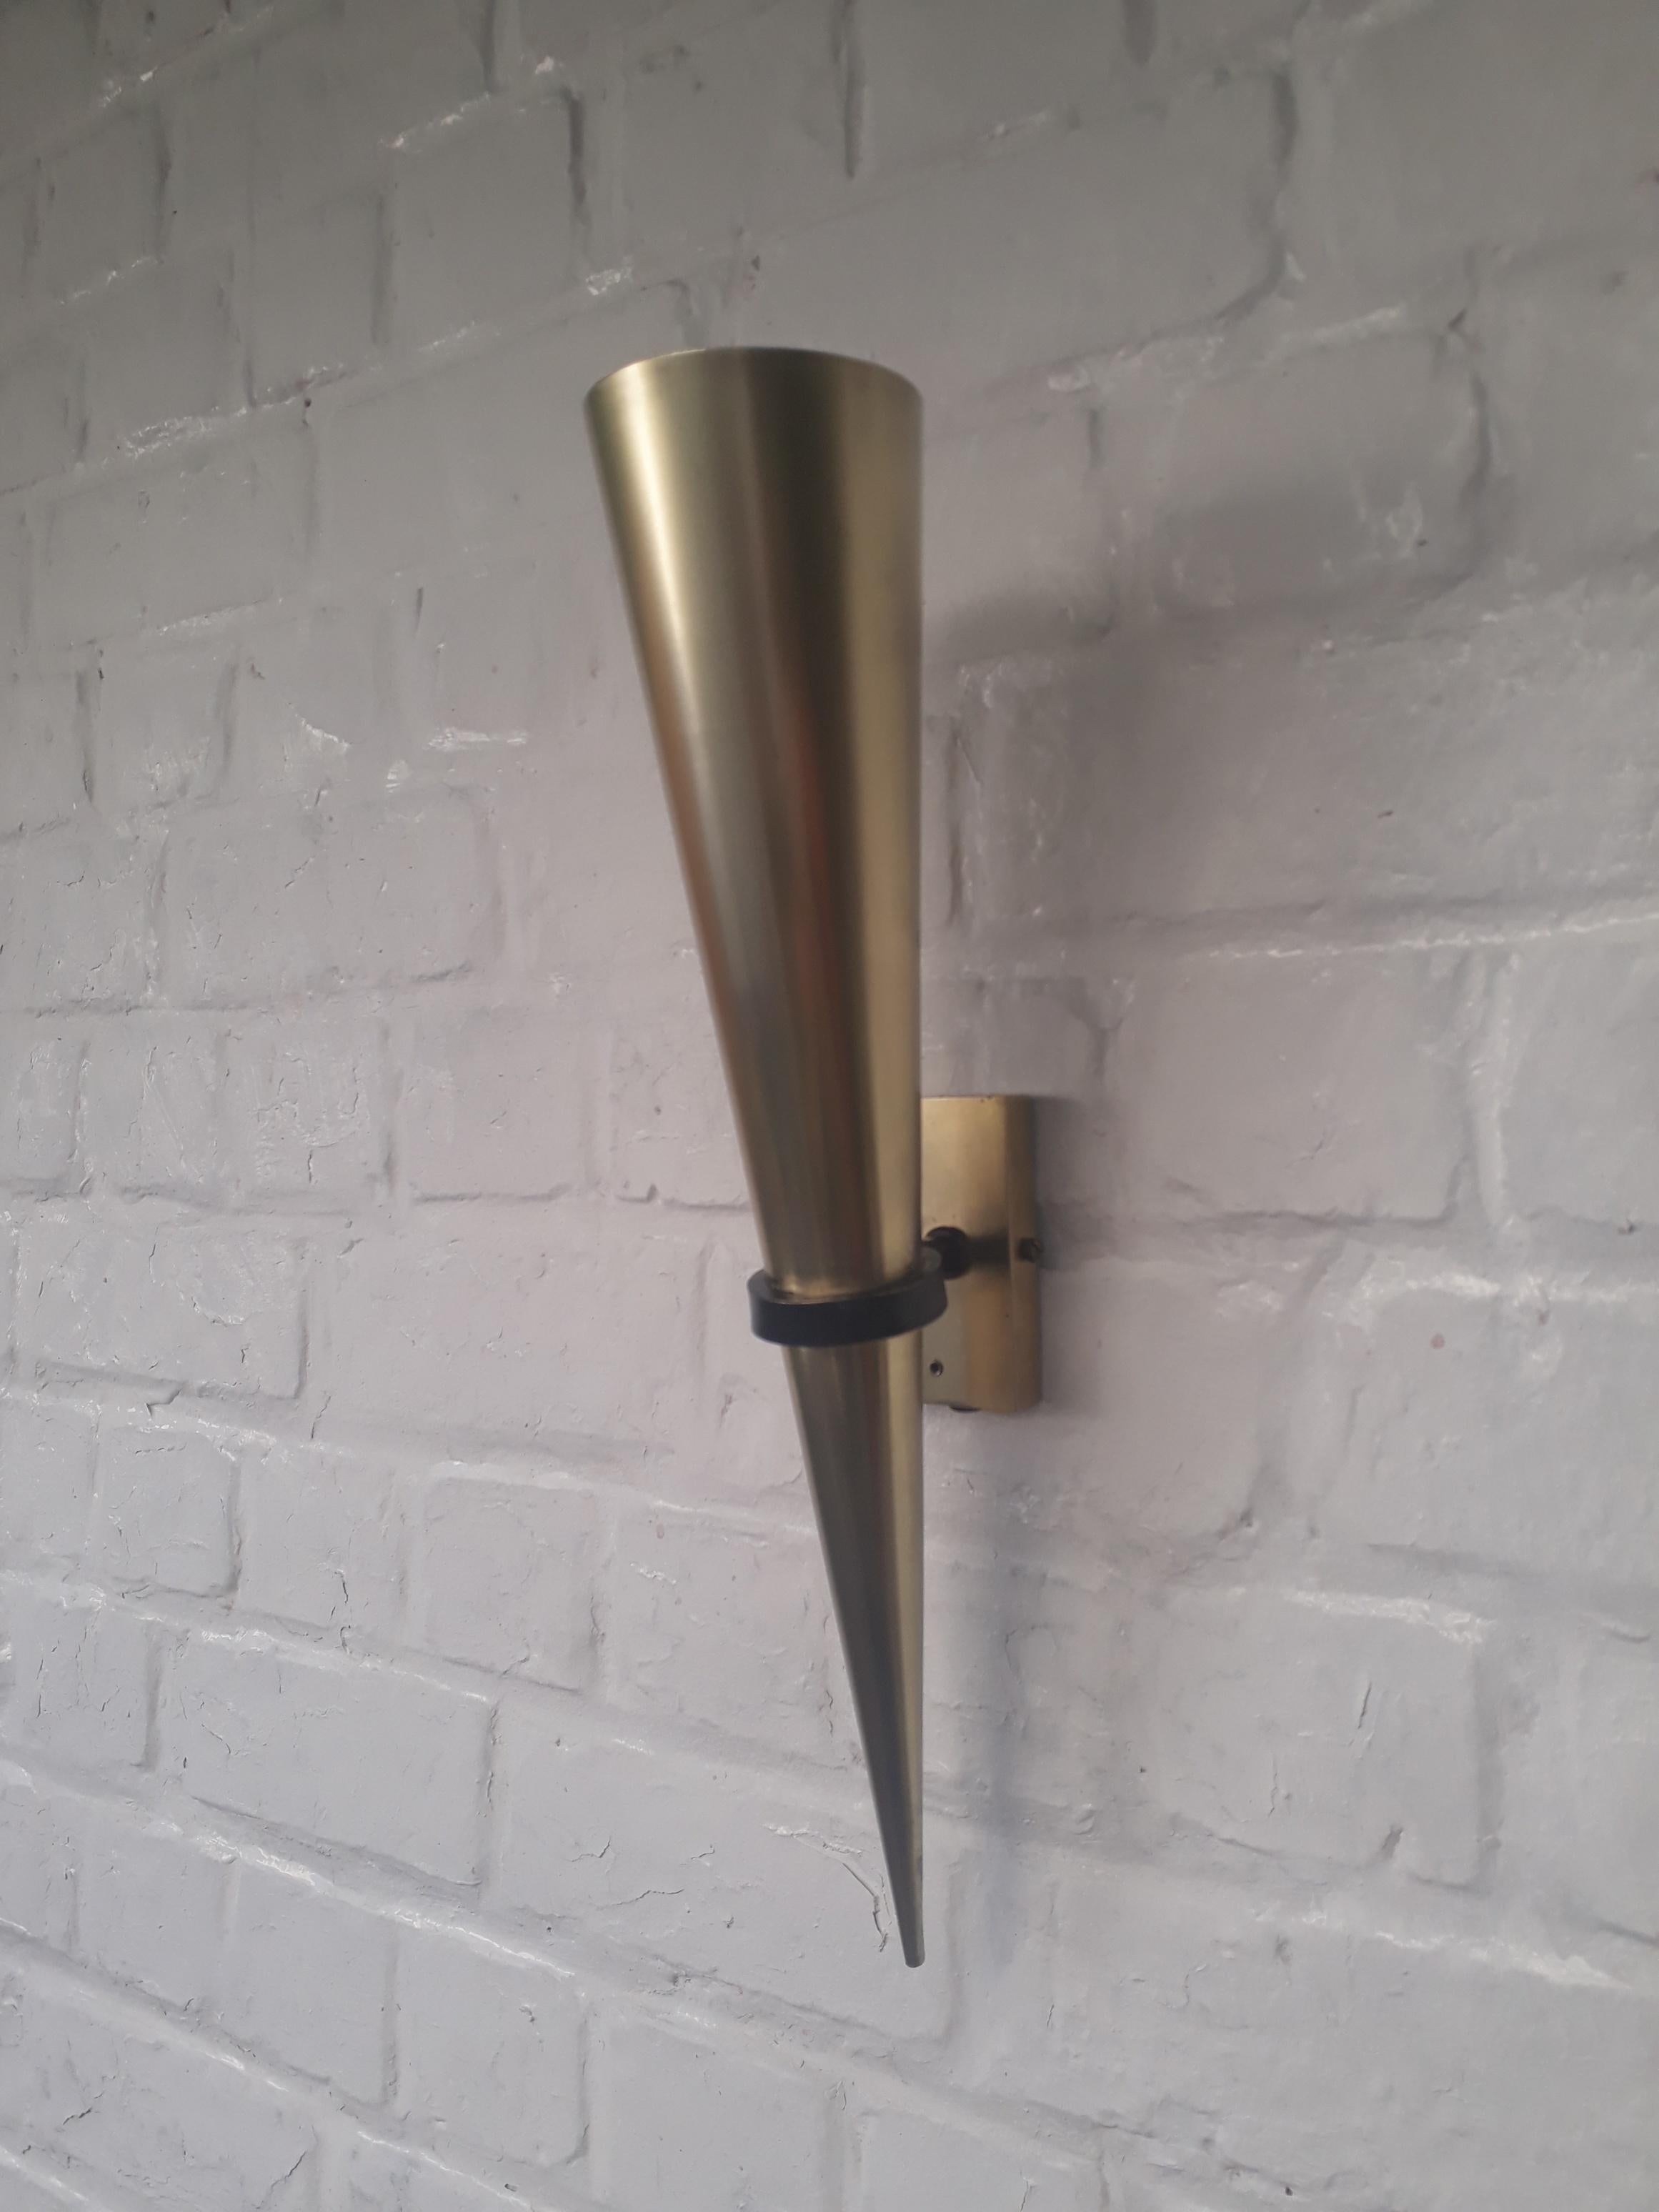 Midcentury wall sconce in full brass with a black painted ringlet holding the cone shaped diffuser. It has a terrific minimalist look. Two small holes were drilled in the front plate.